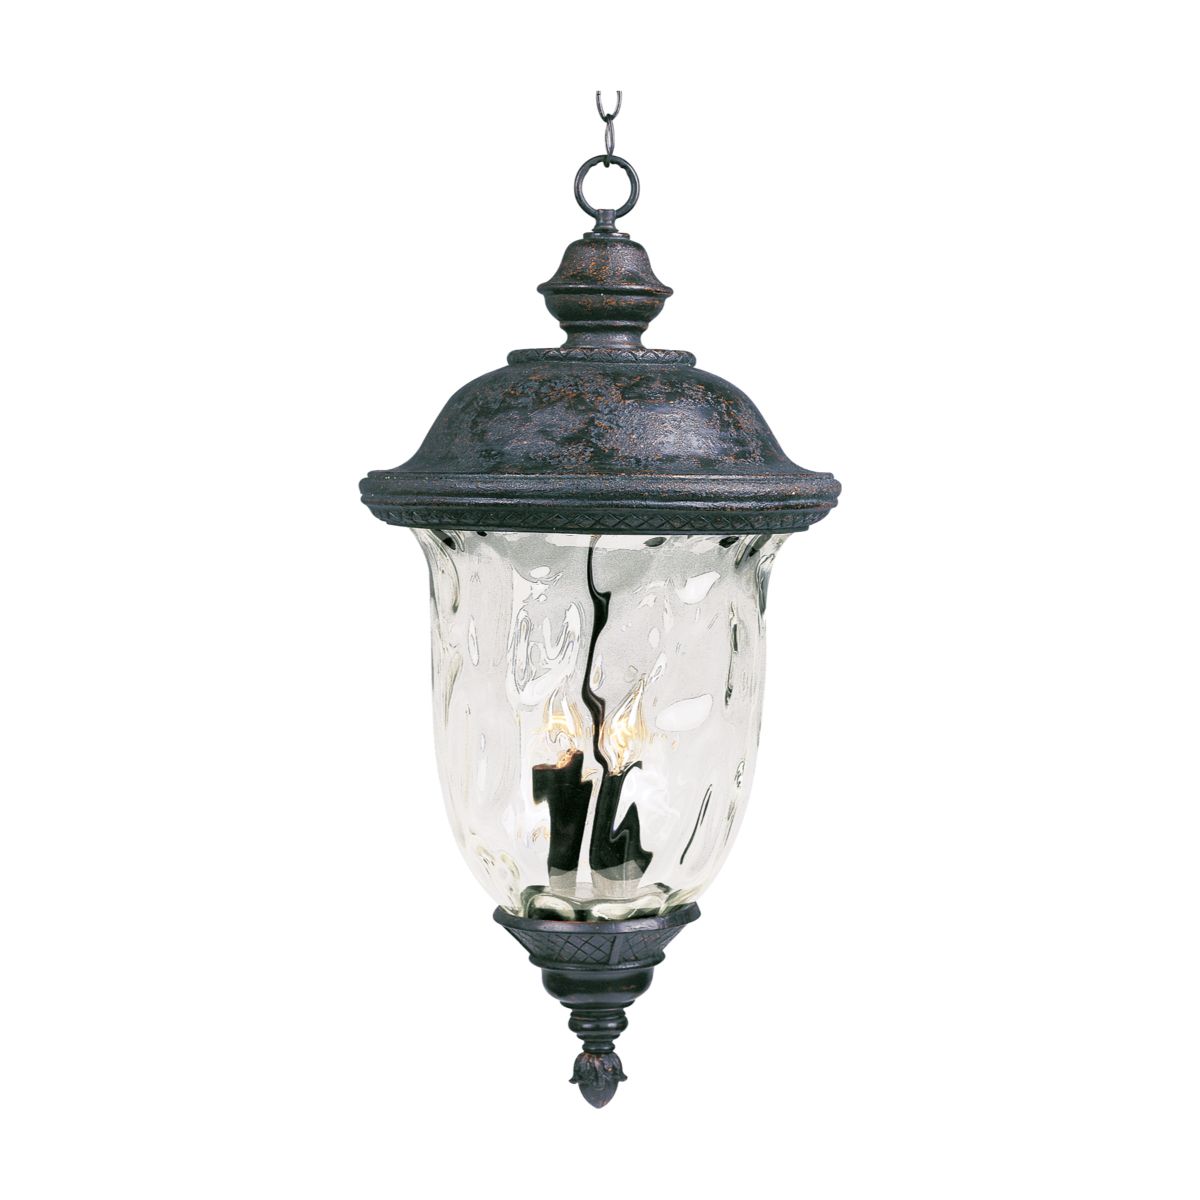 Carriage House VX 28 in. 3 Lights Outdoor Hanging Lantern Bronze Finish